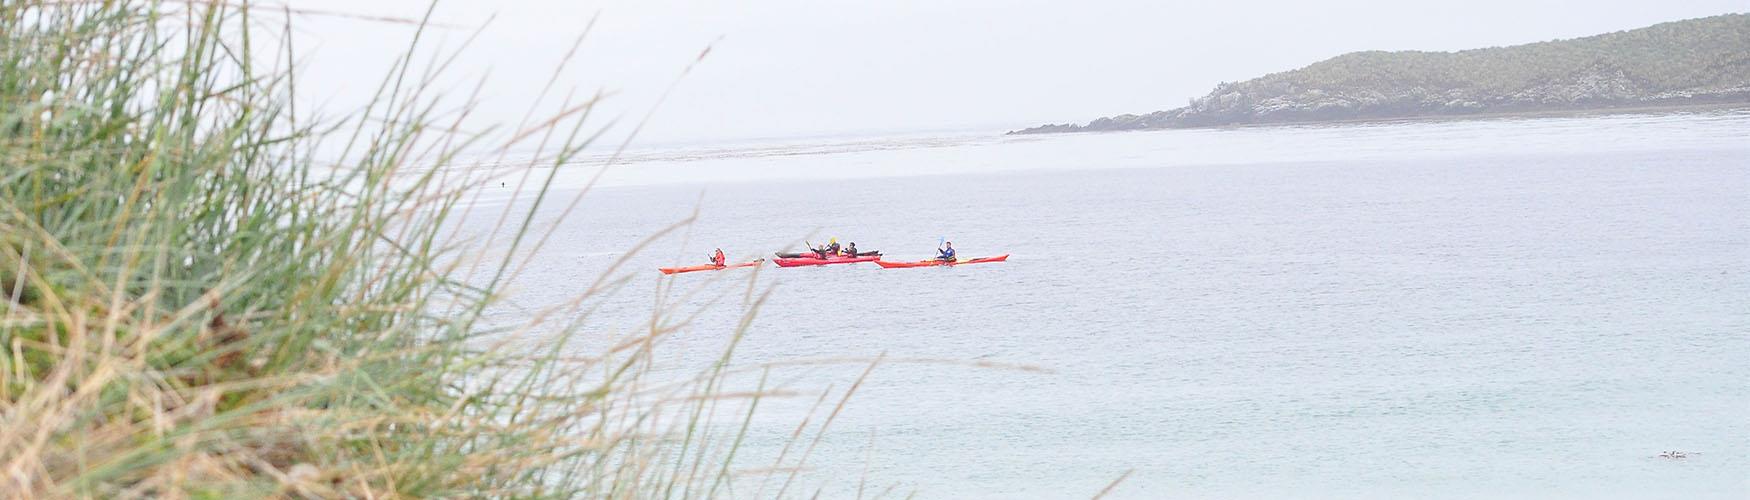 Kayaking in the Falkland Islands is a perfect half day tour to see nature in a different way and experience.